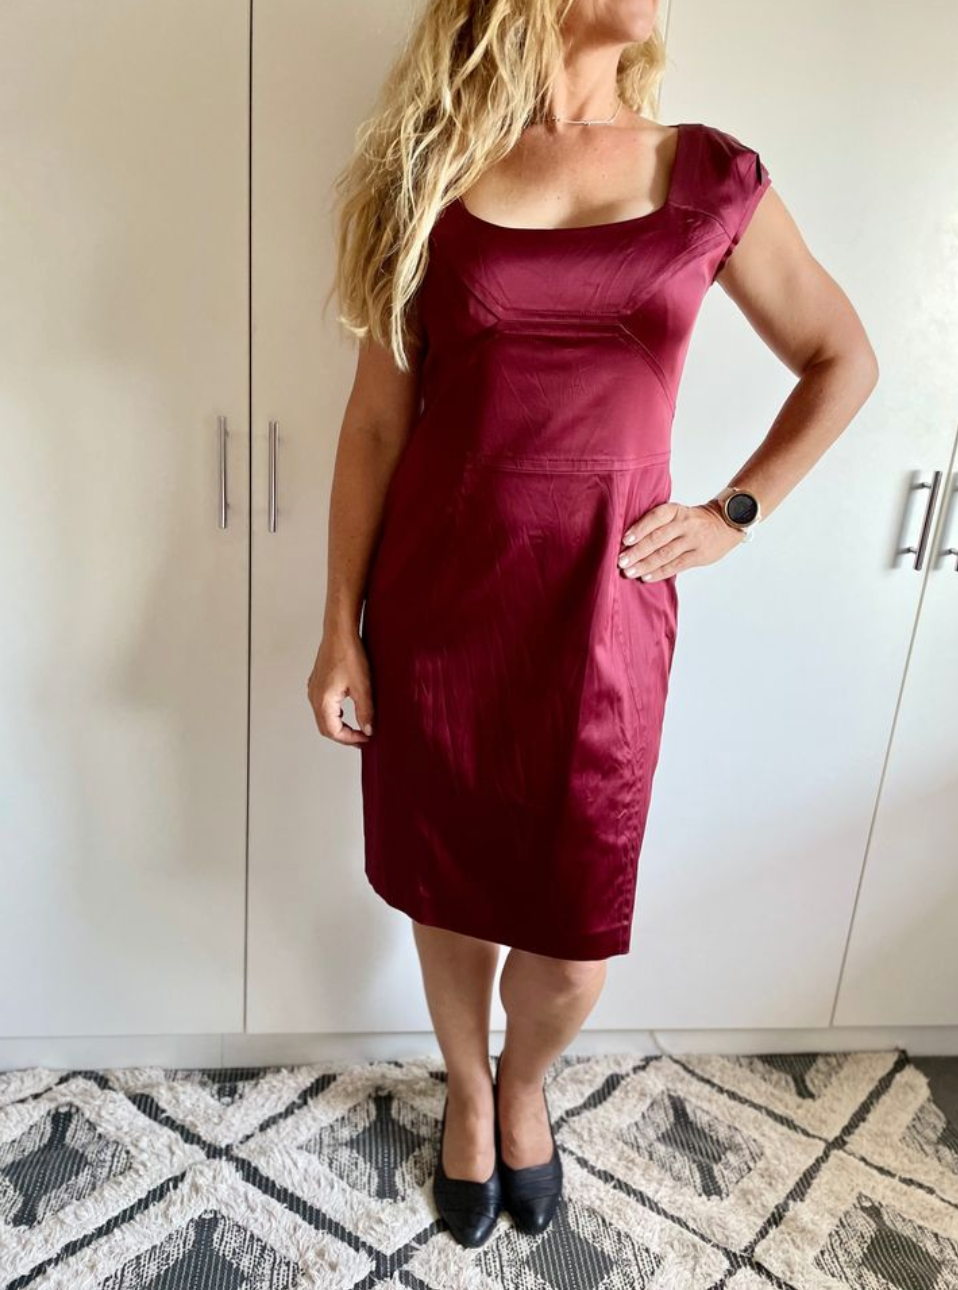 Size 14 CUE in the City Burgundy Knee Length Dress